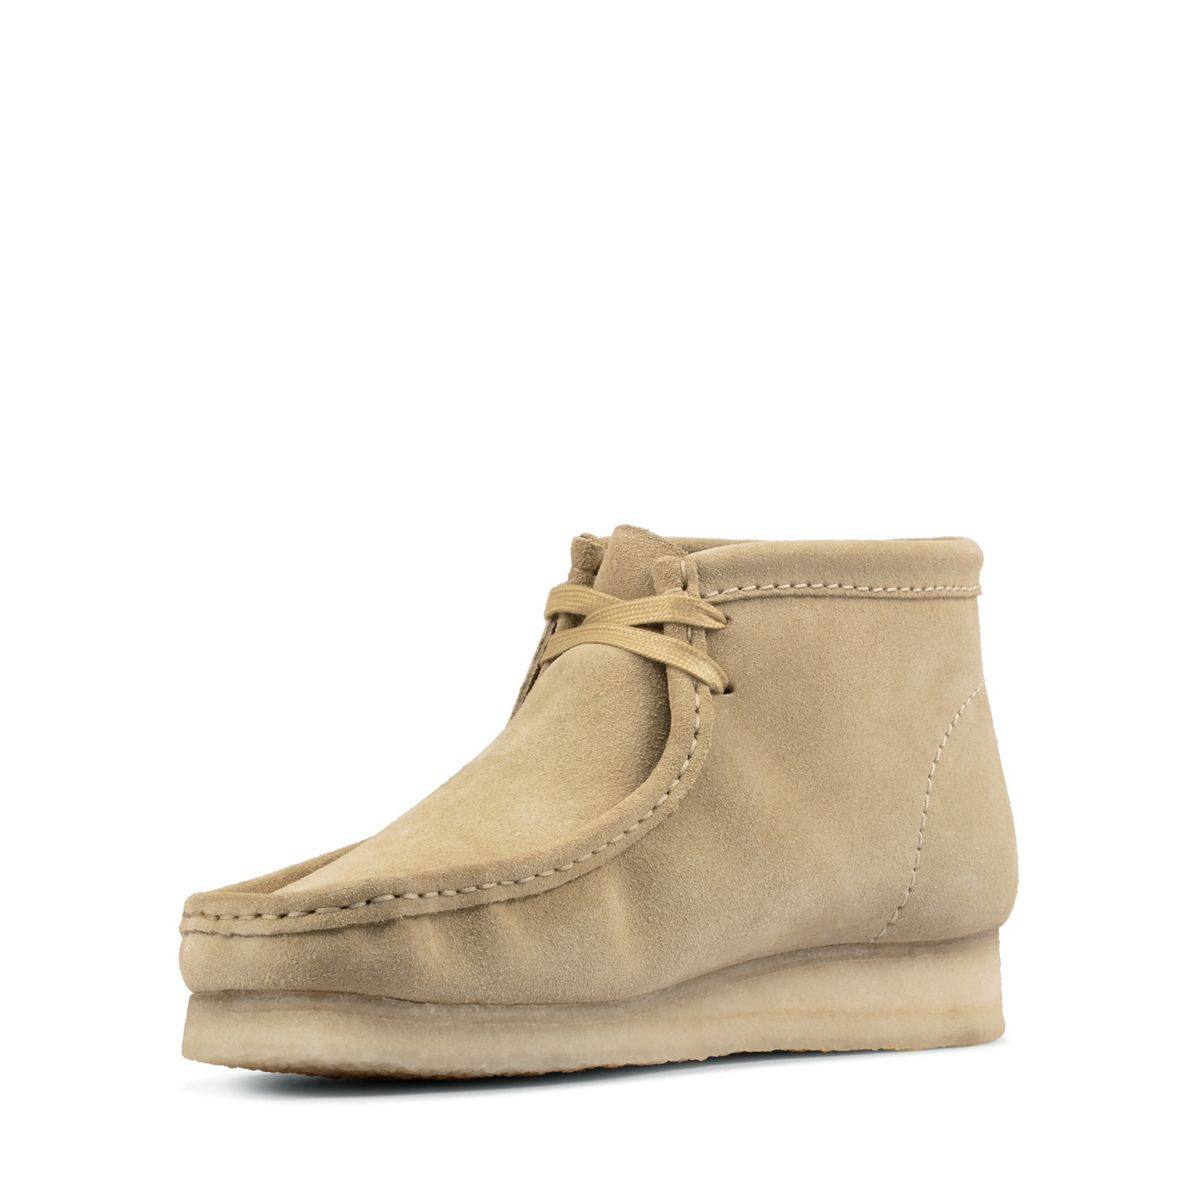 Wallabee Boot Maple Suede - Clarks Canada Official | Clarks Shoes